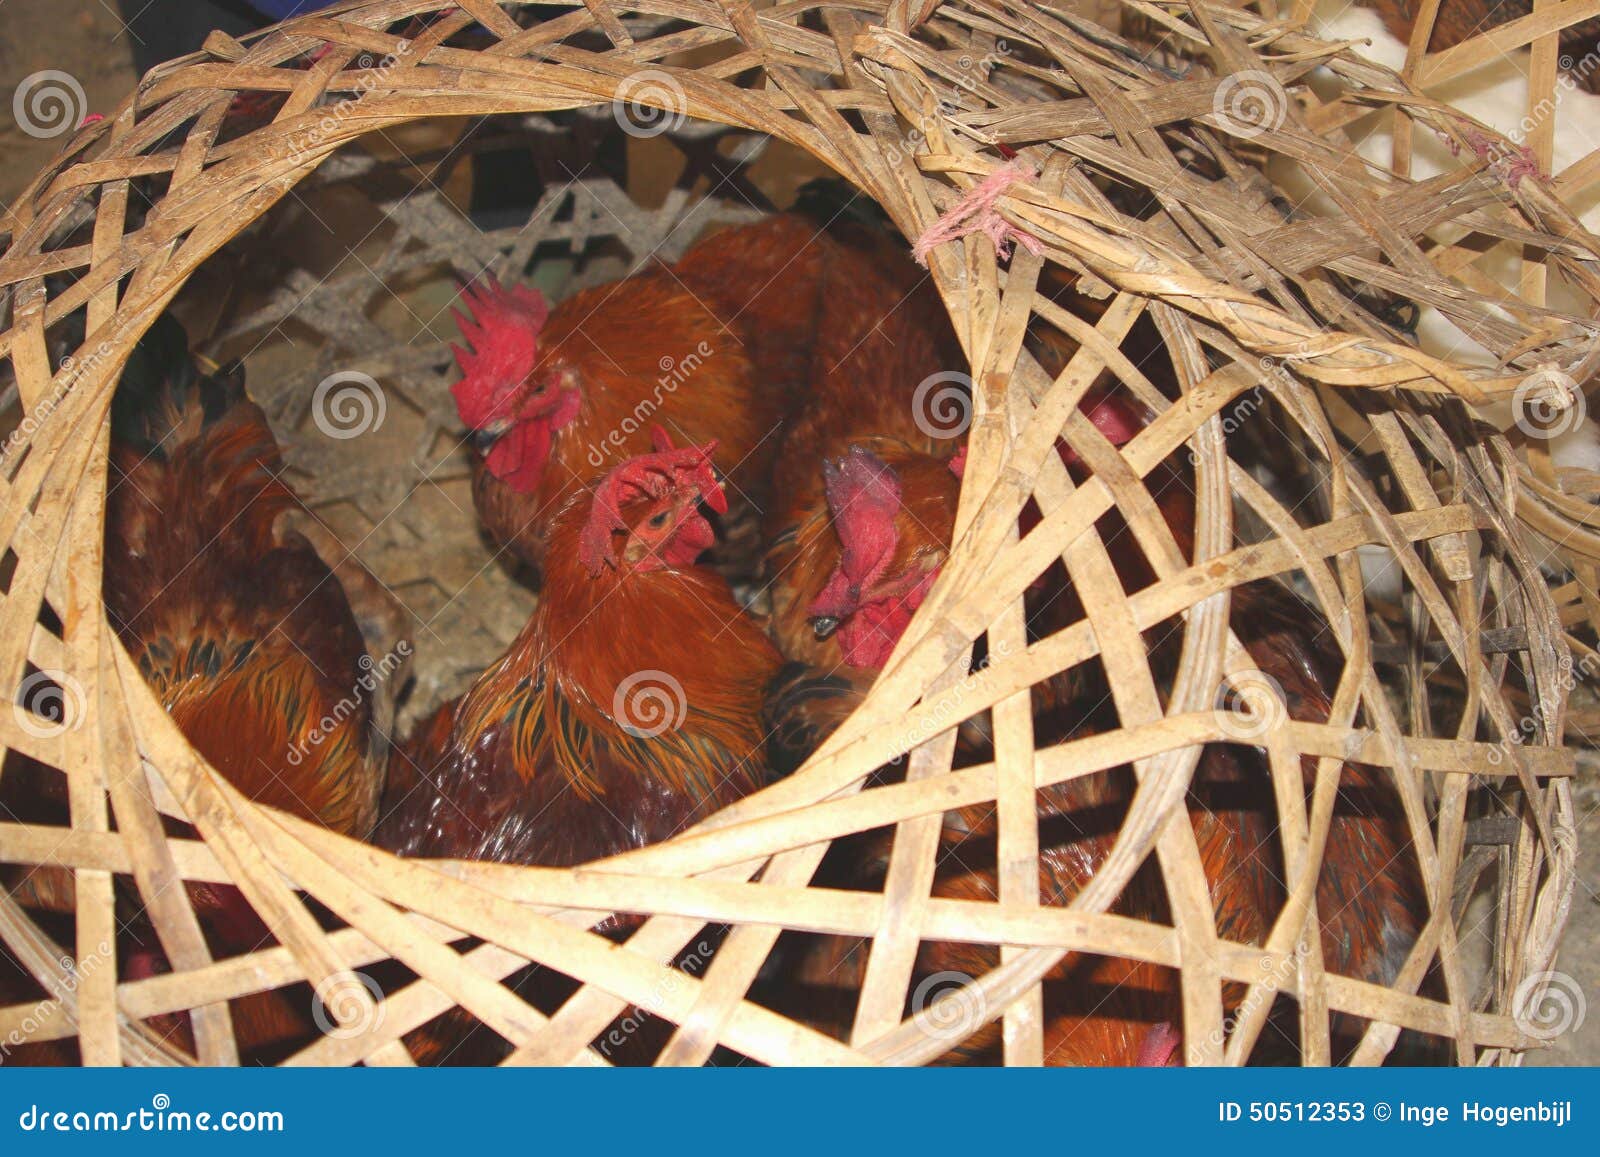 Live Chickens Cause Outbreaks Of Sars, H7N9, H5N8 And H5N1 Viruses Into China, Asia ...